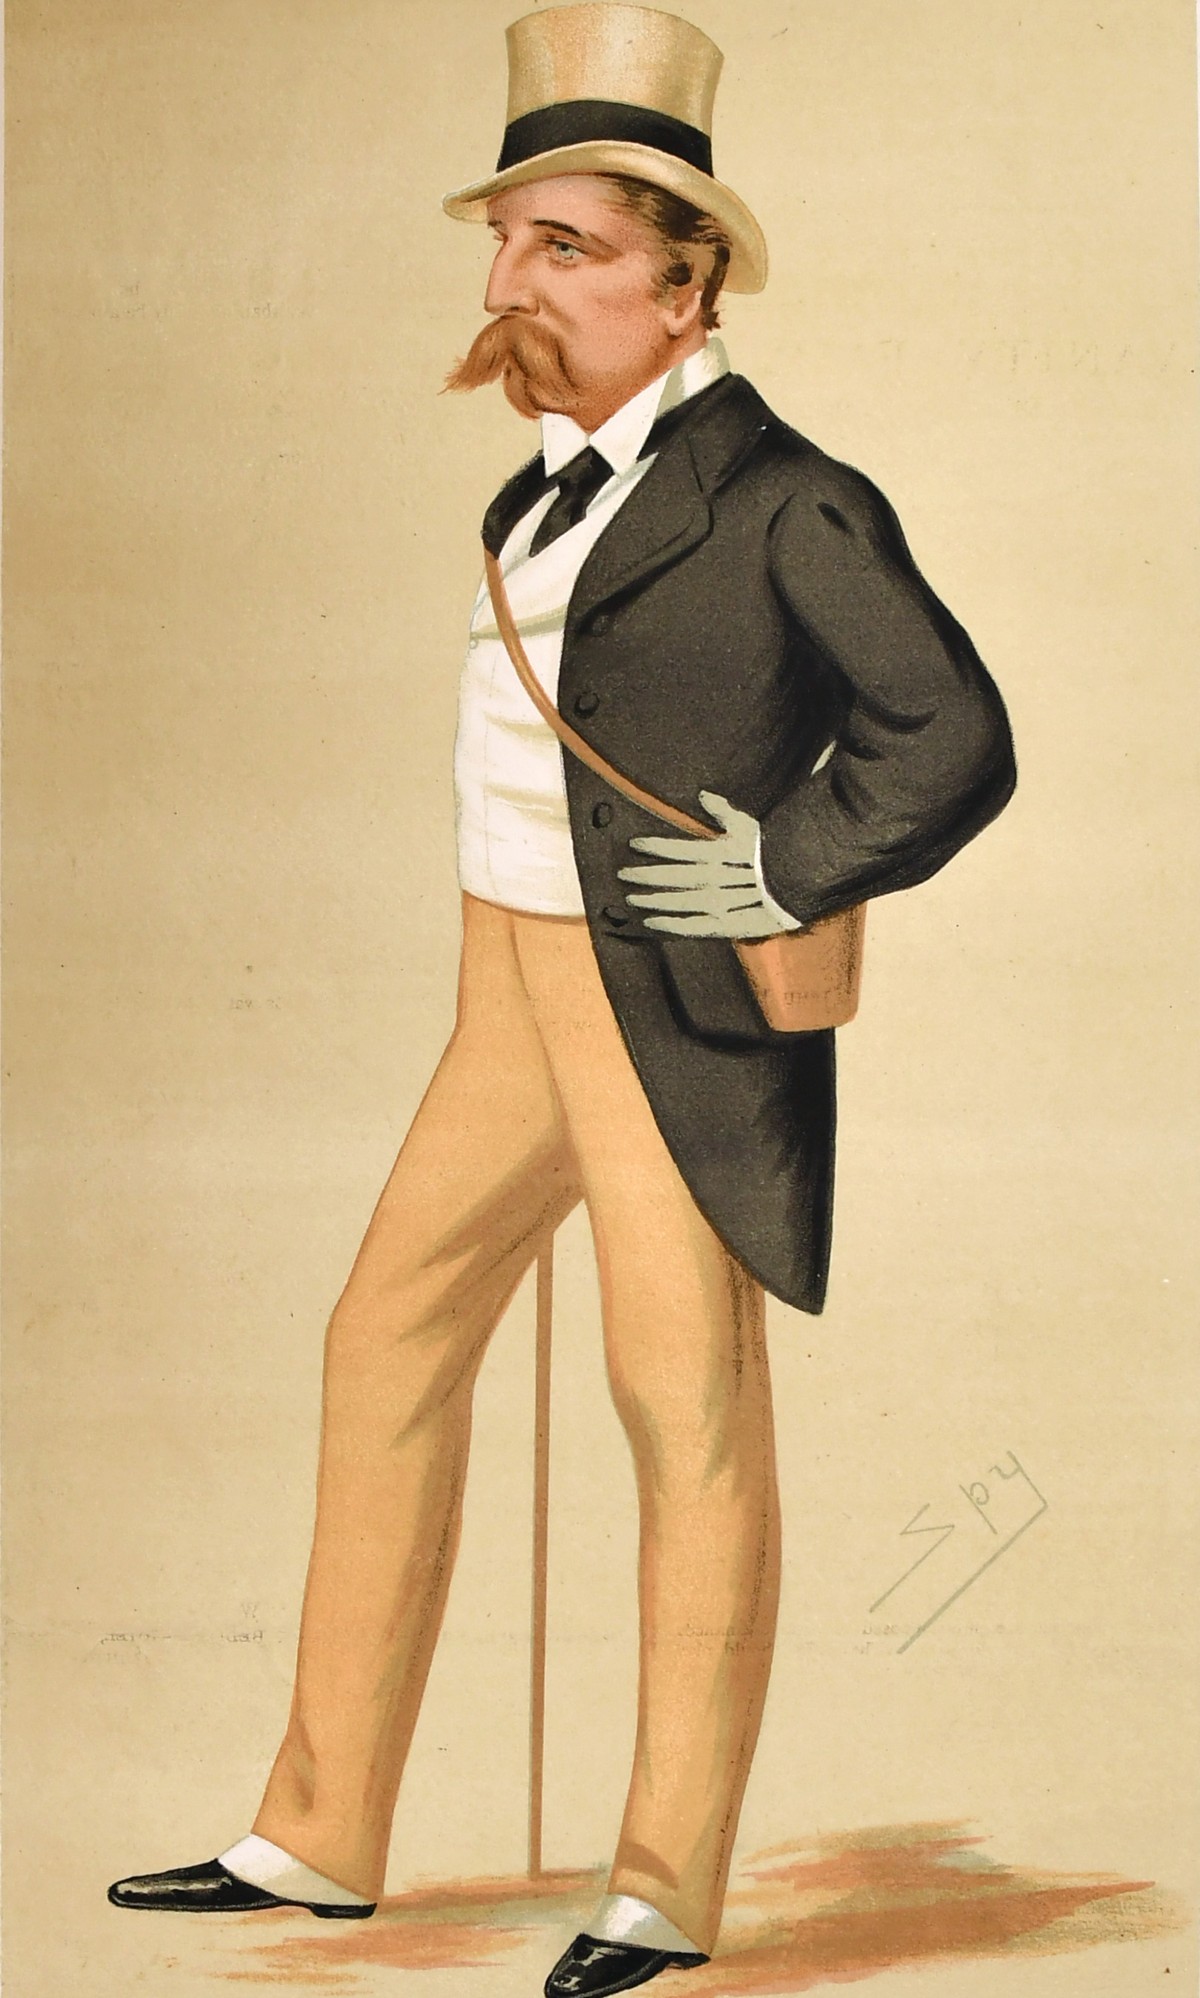 A collection of Vanity Fair prints depicting finely dressed gentlemen with various articles